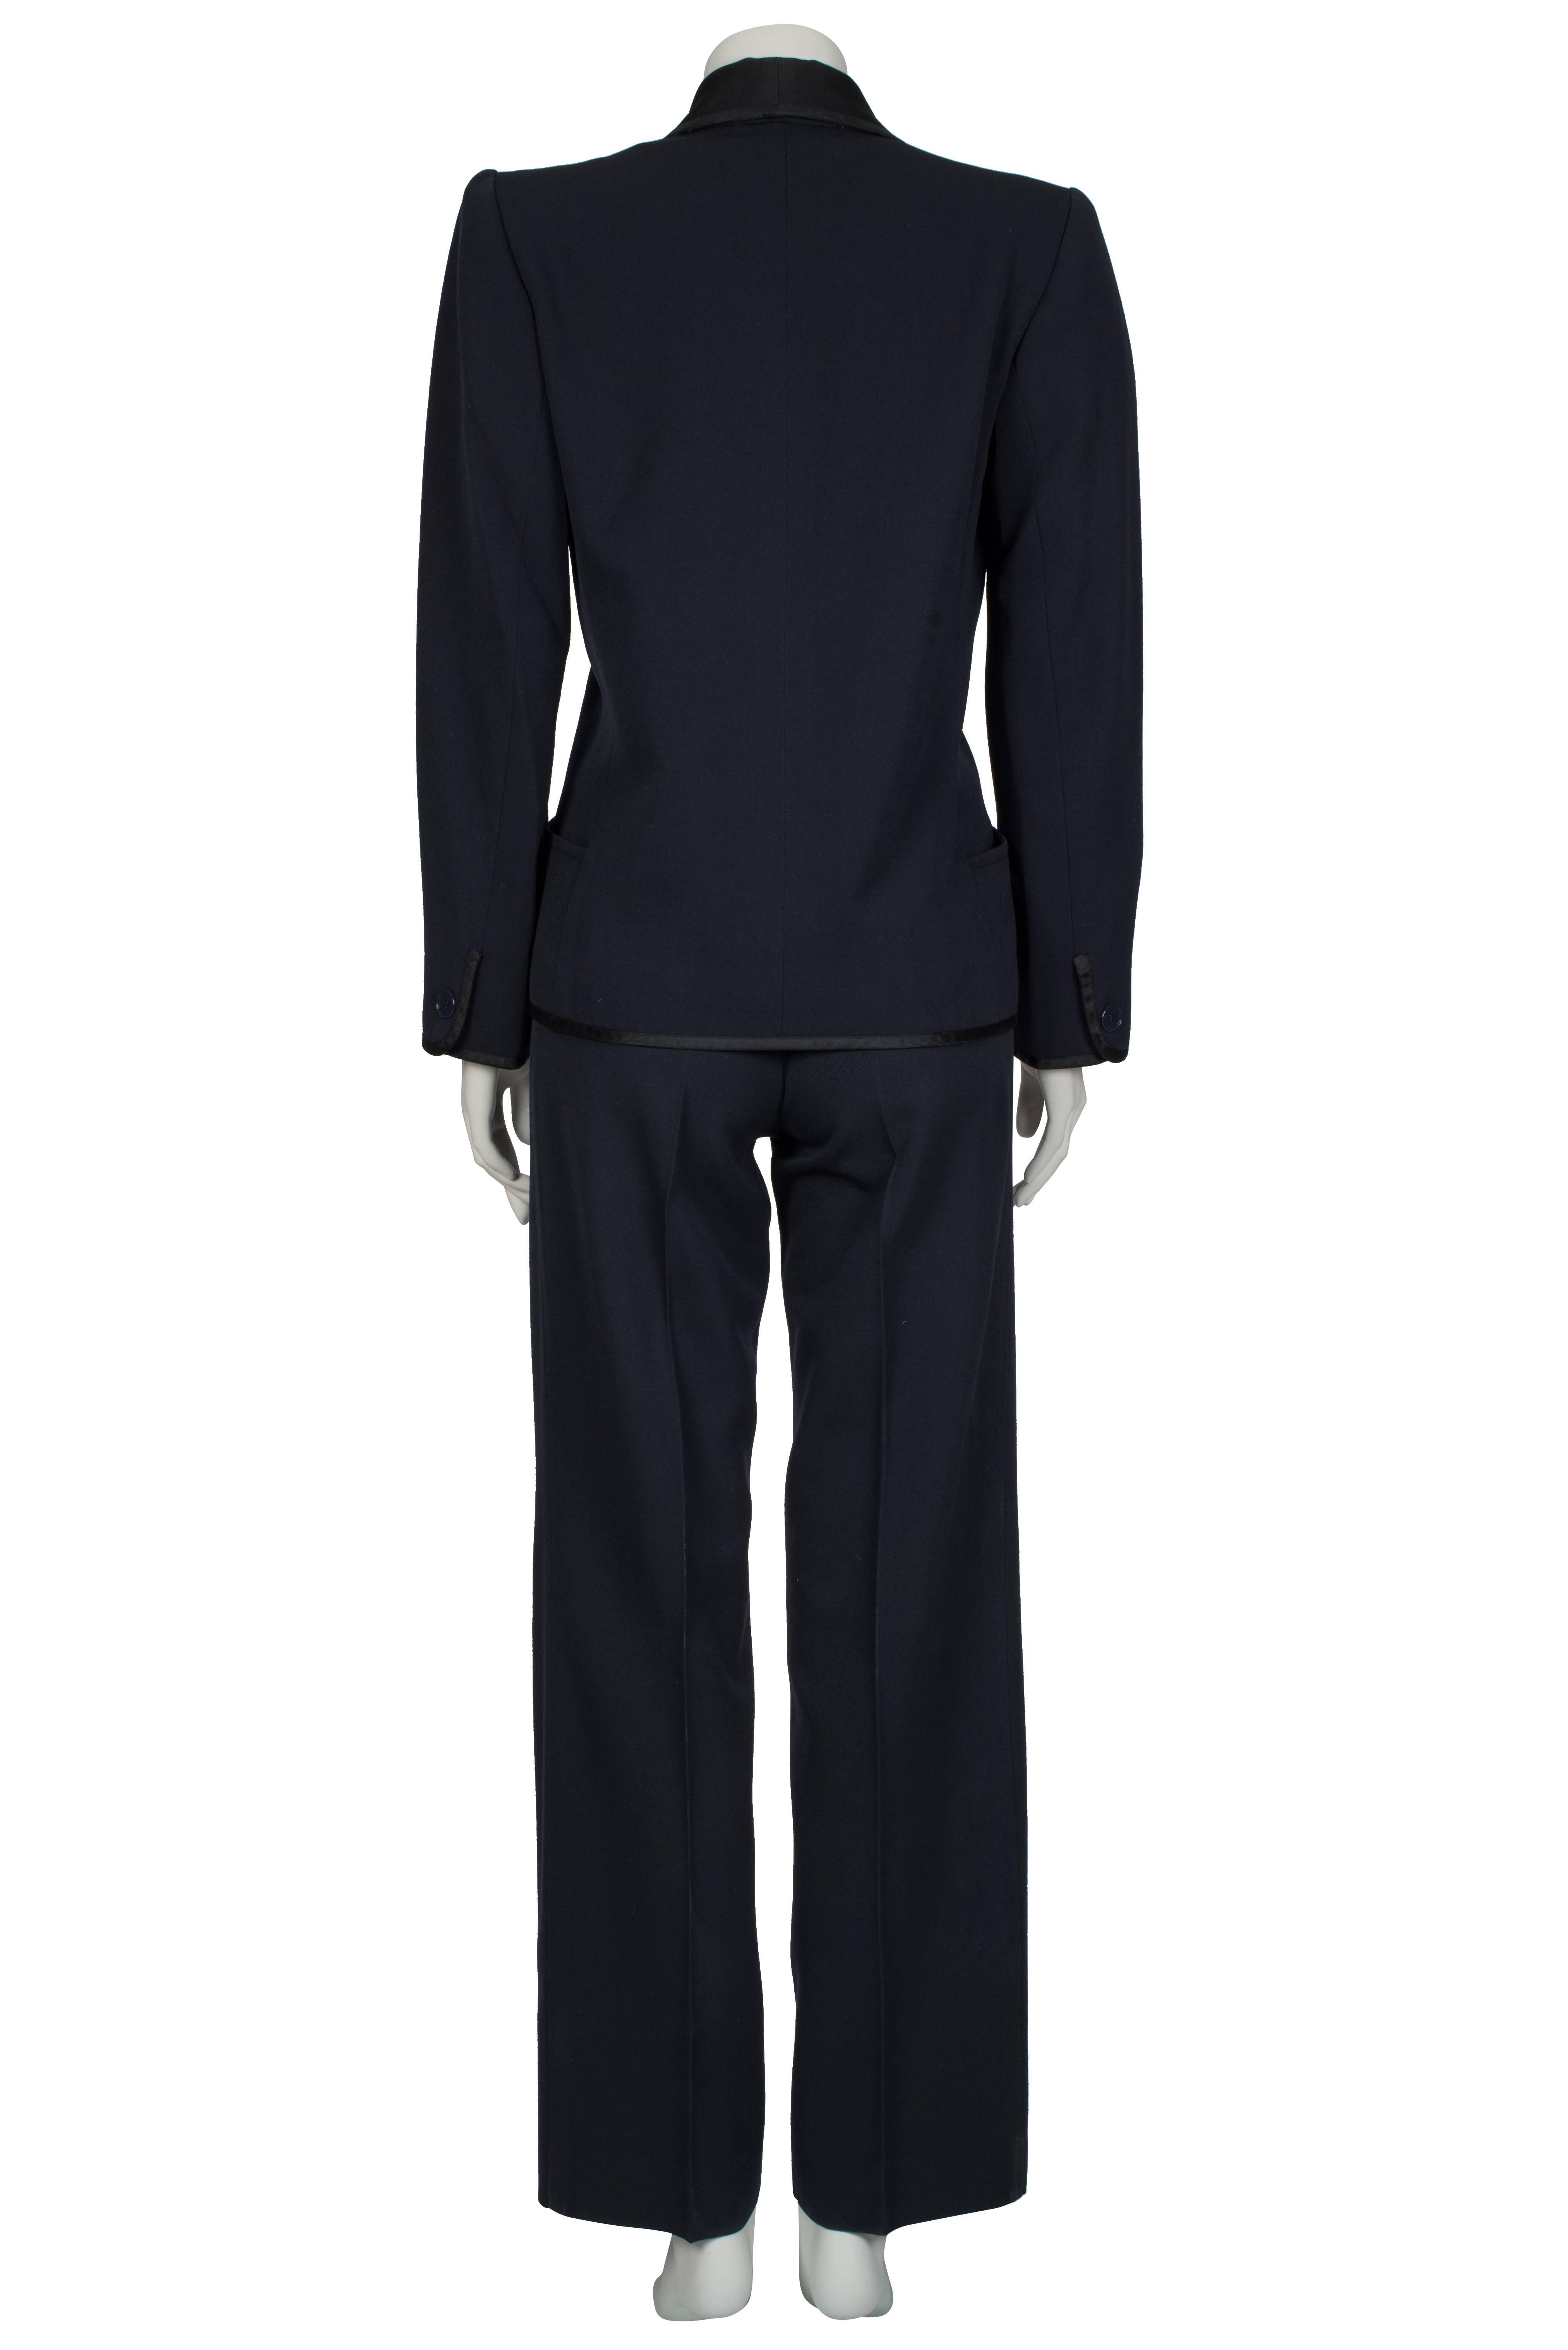 Yves Saint Laurent Rive Gauche Navy Le Smoking Suit ca 1979 In Excellent Condition For Sale In London, GB